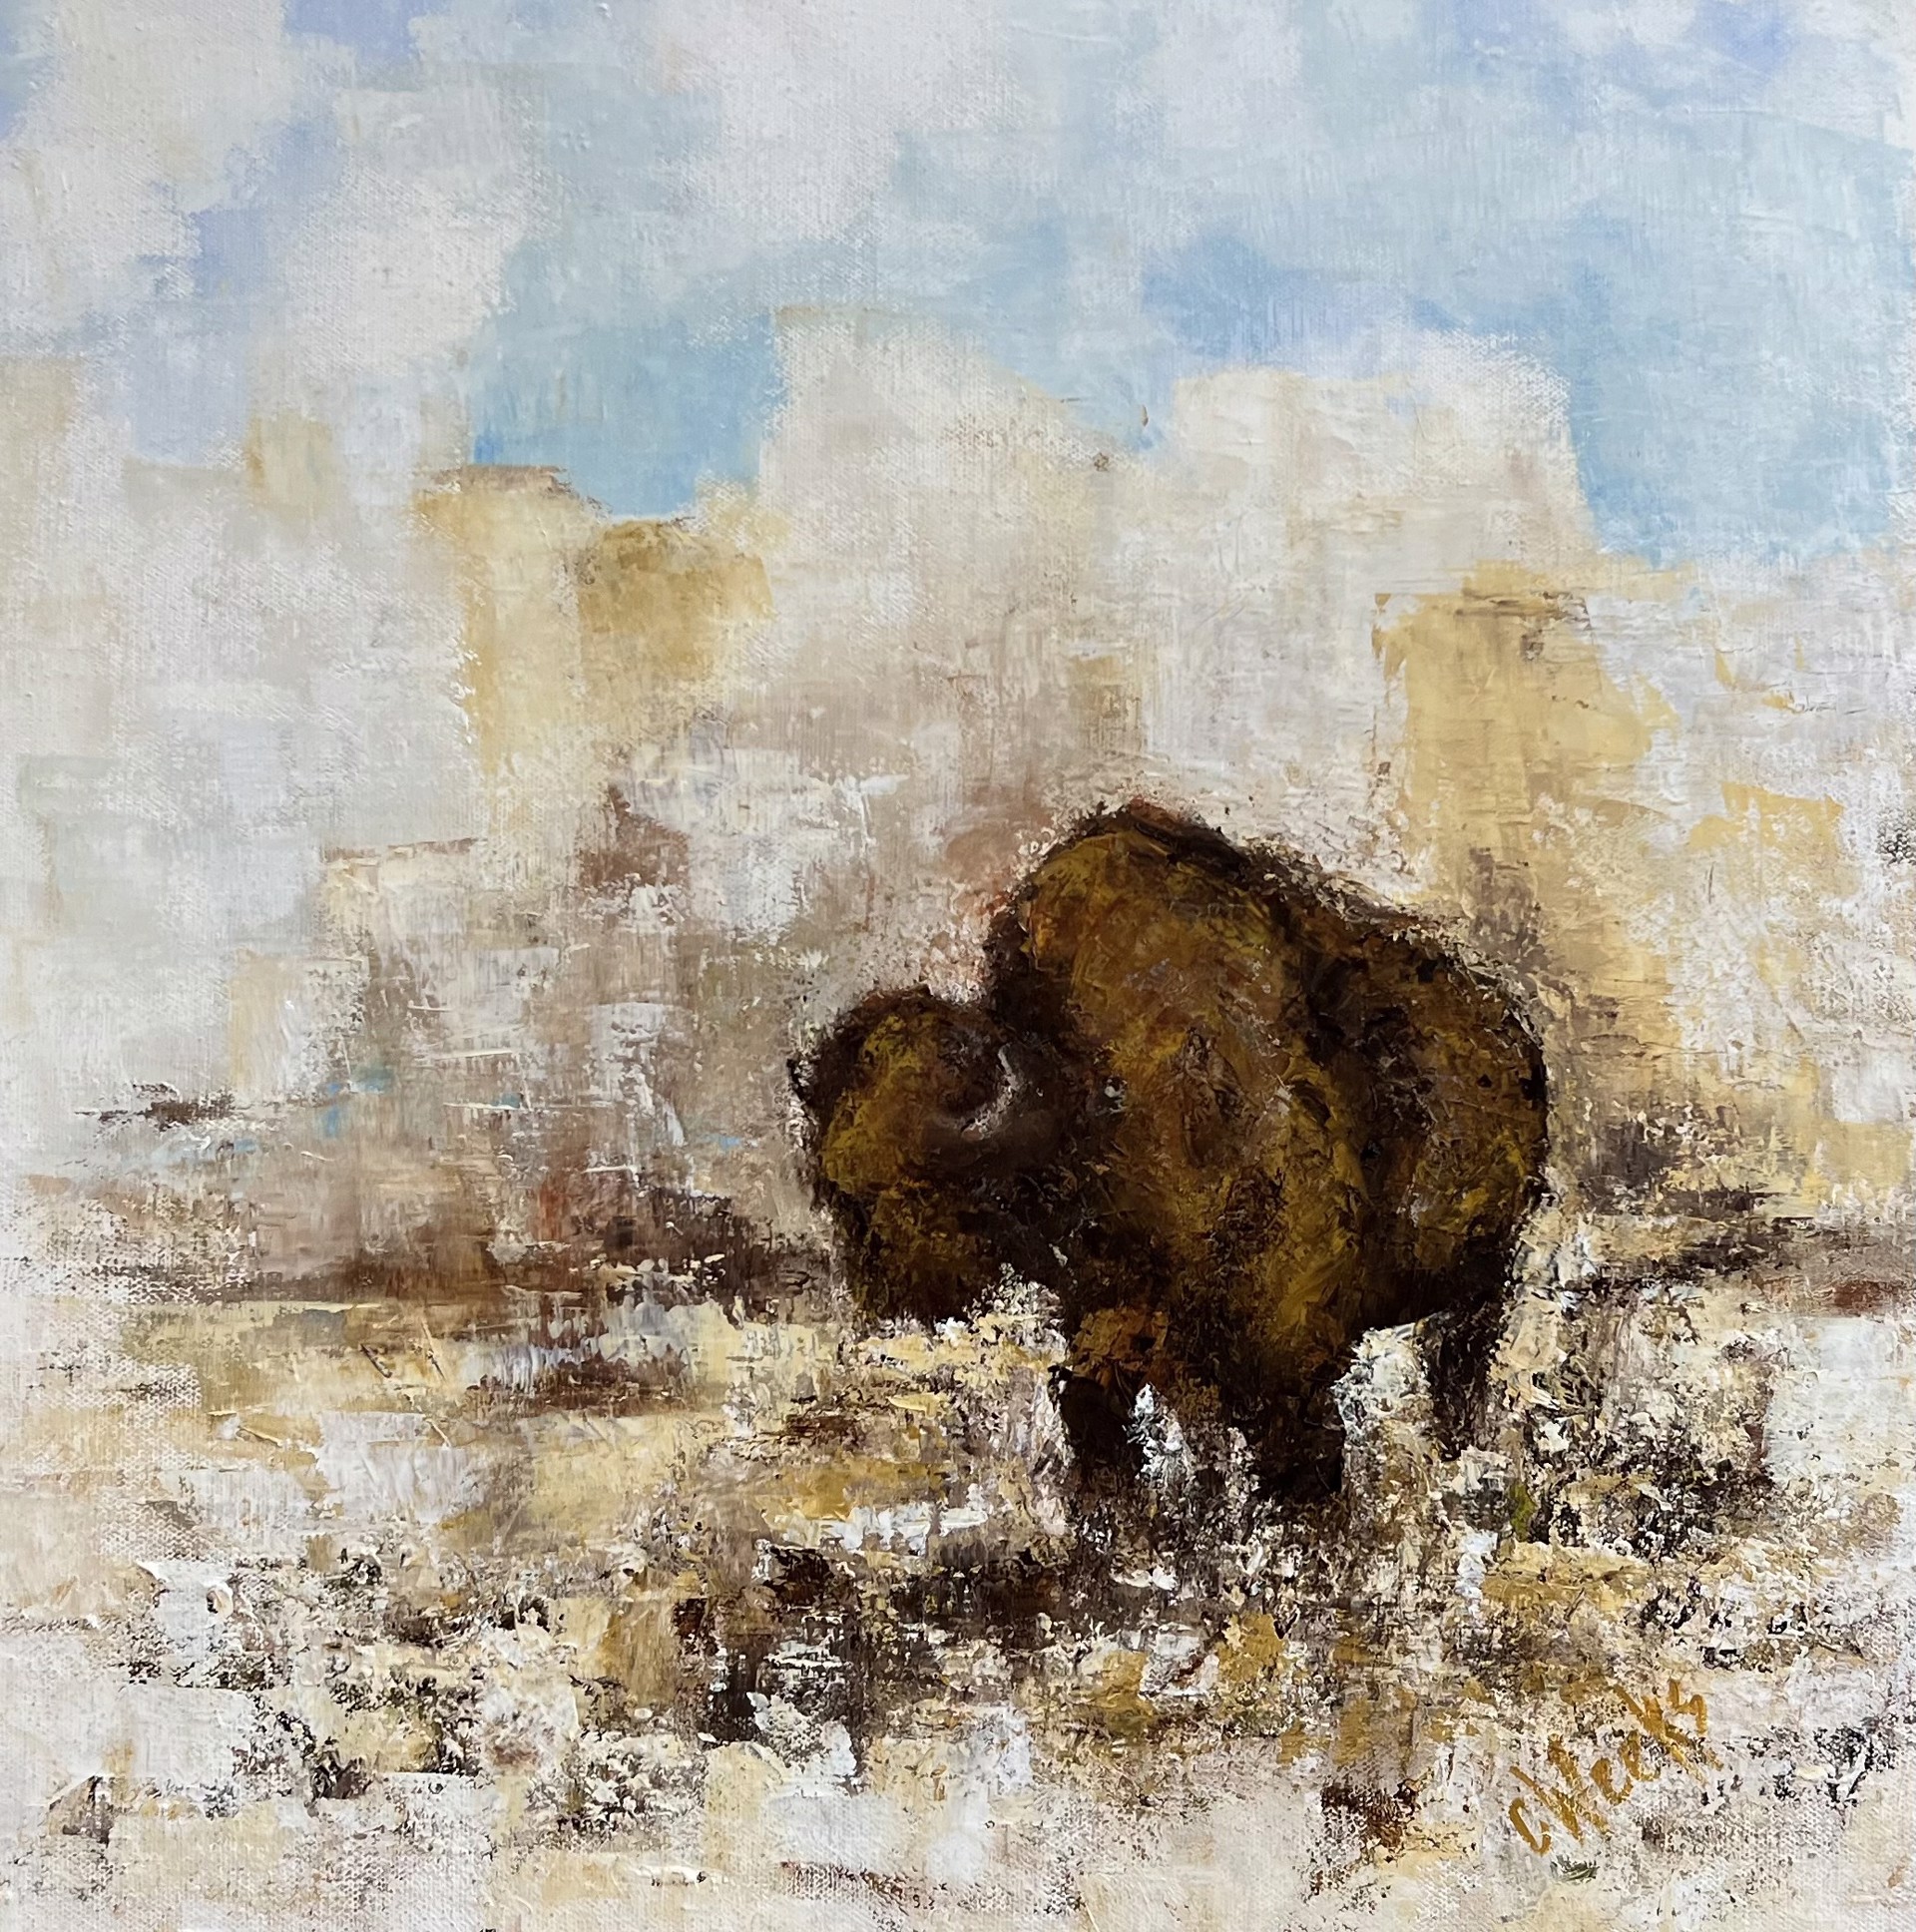 Grazing In The Canyon by Connie Weeks